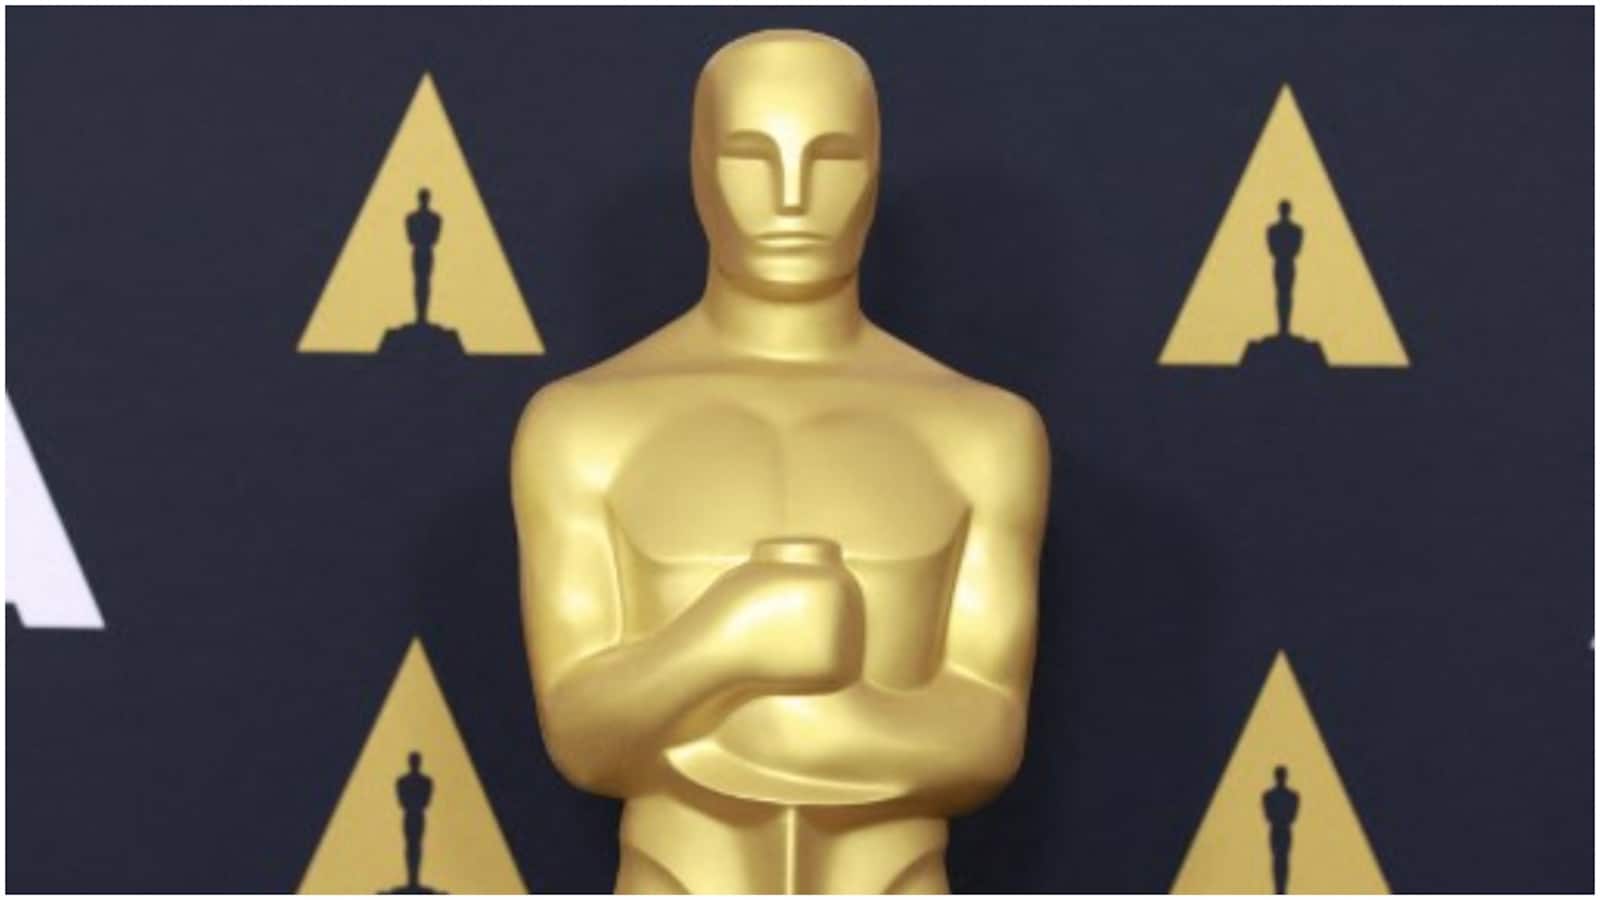 Academy Awards: Why the Oscar statuette is only worth $1